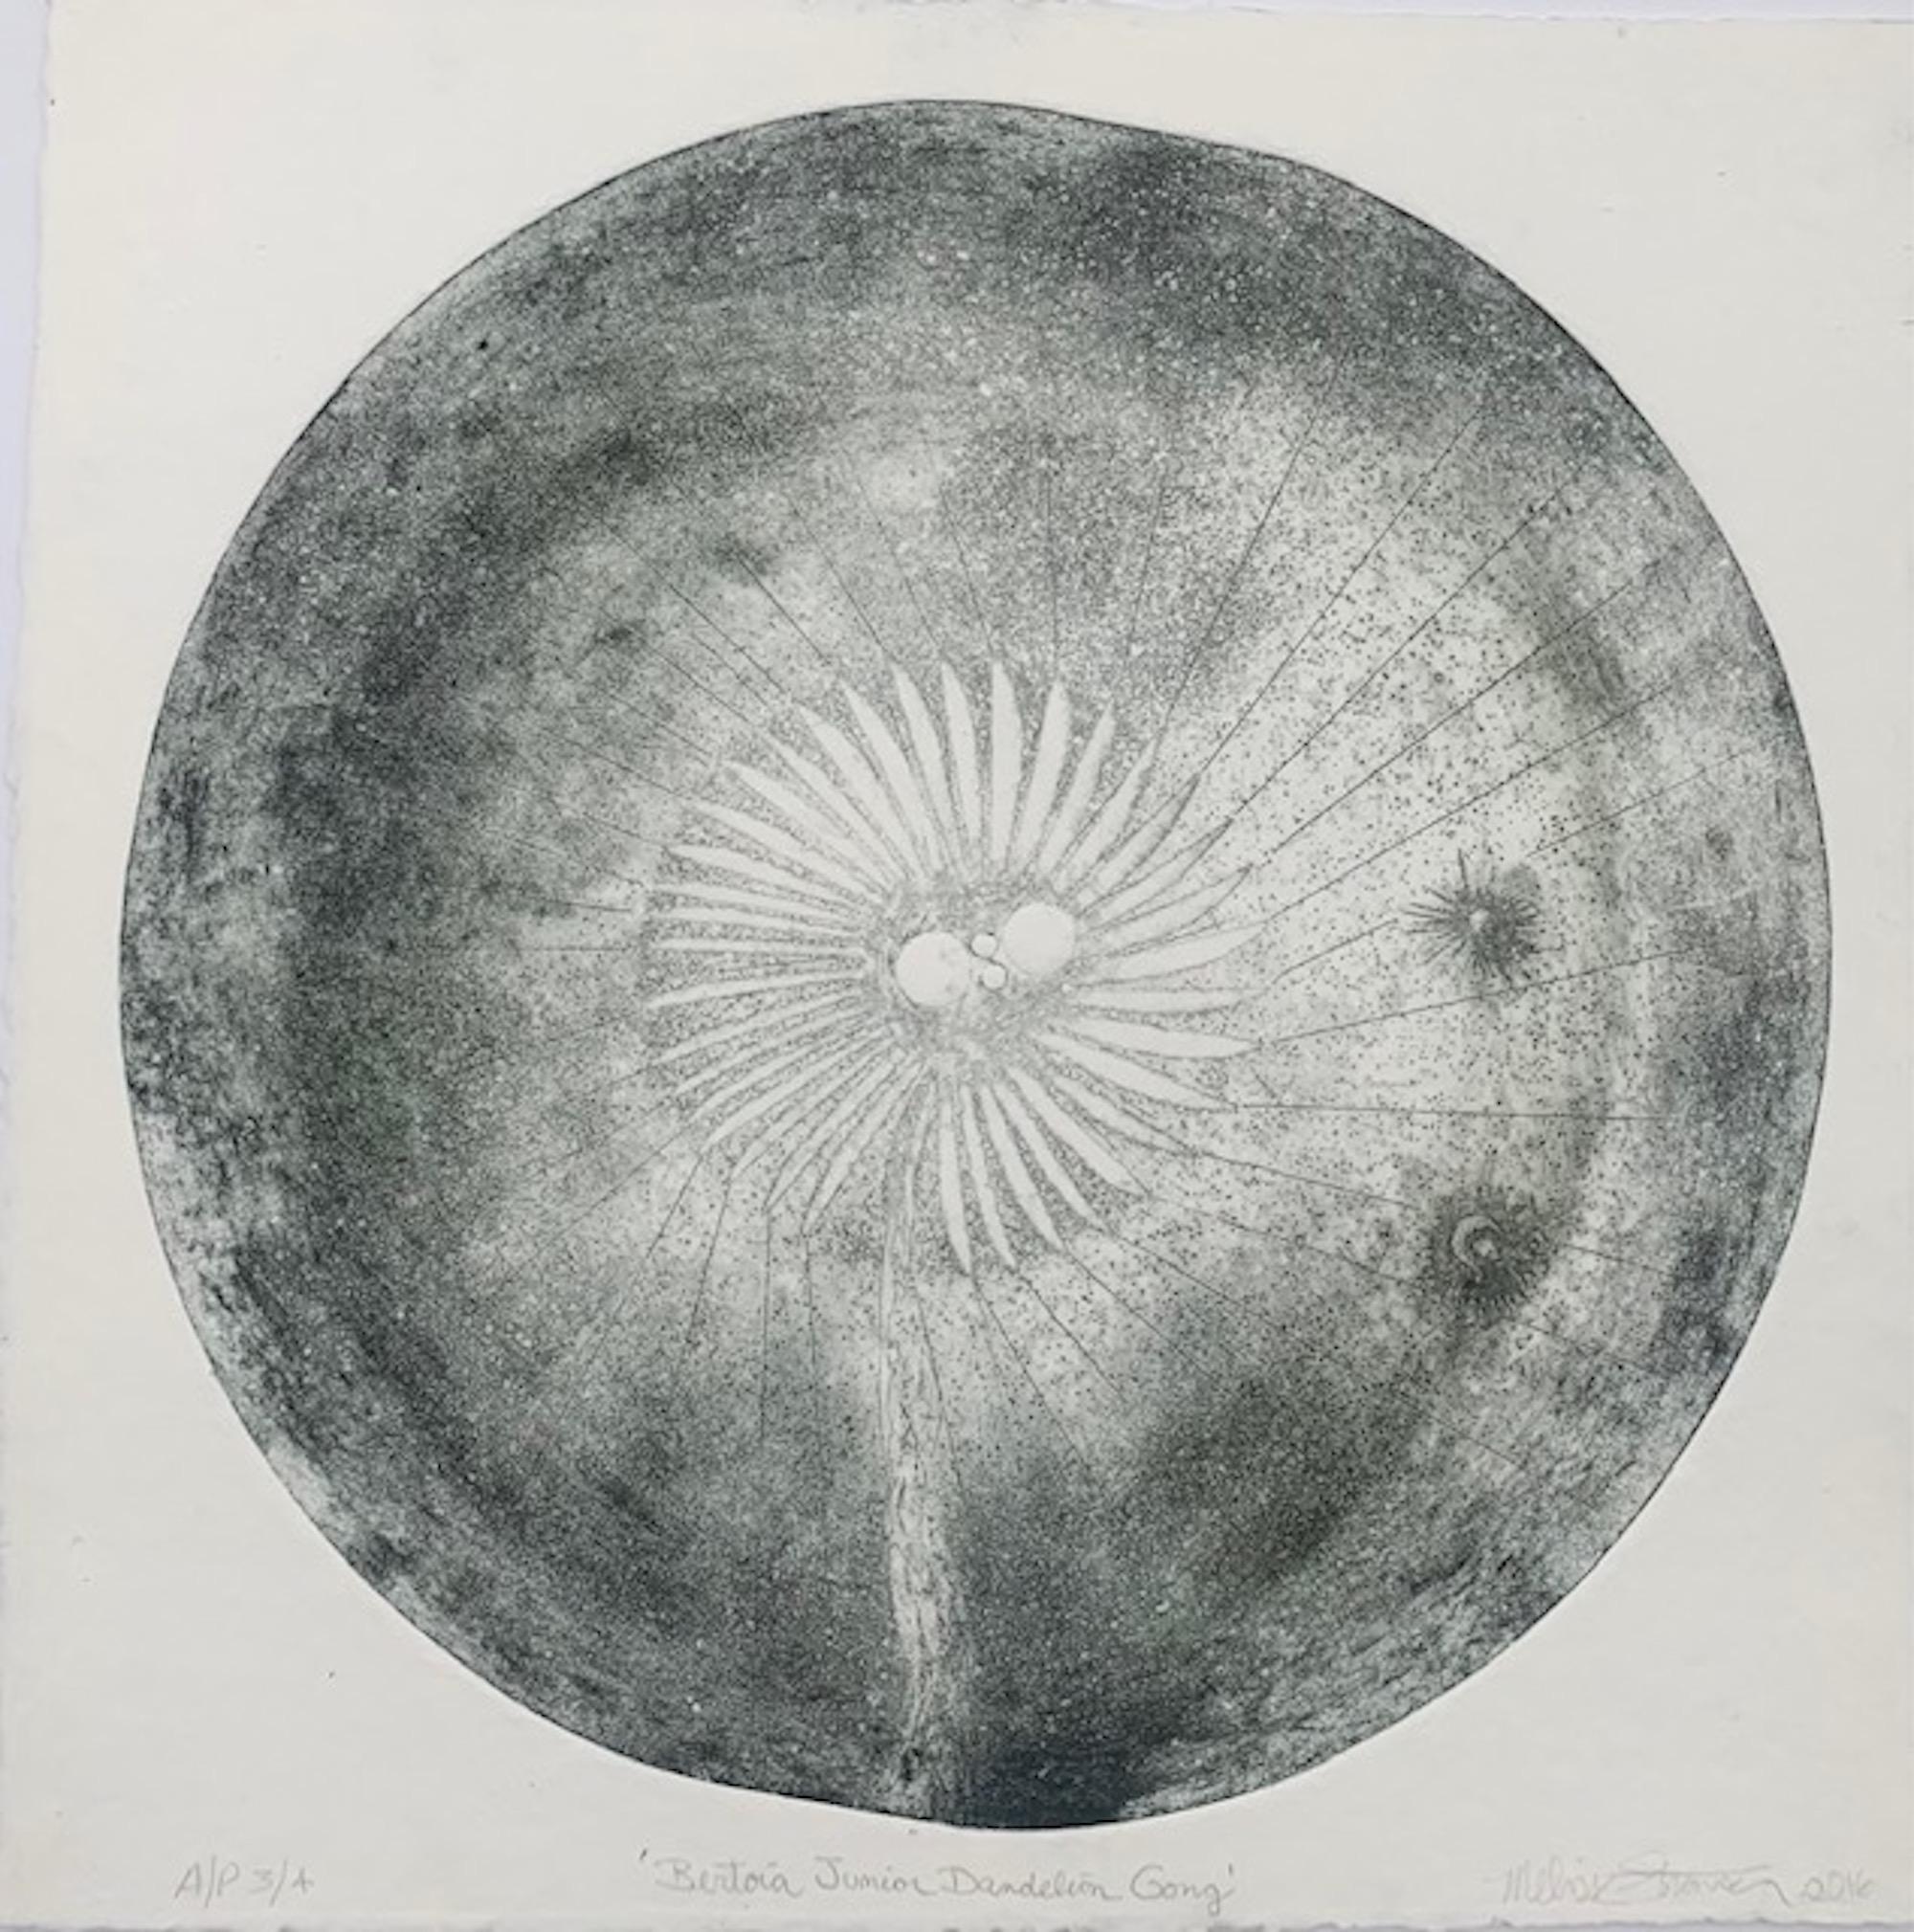 Contemporary artist Melissa Strawser’s Bertoia Junior Dandelion Gong Print is a pulled Artist Proof, an original intaglio print using handmade Doug Zucco White Crow Printmaking Paper (Fleetwood, PA) with colored inks from a single bronze plate that